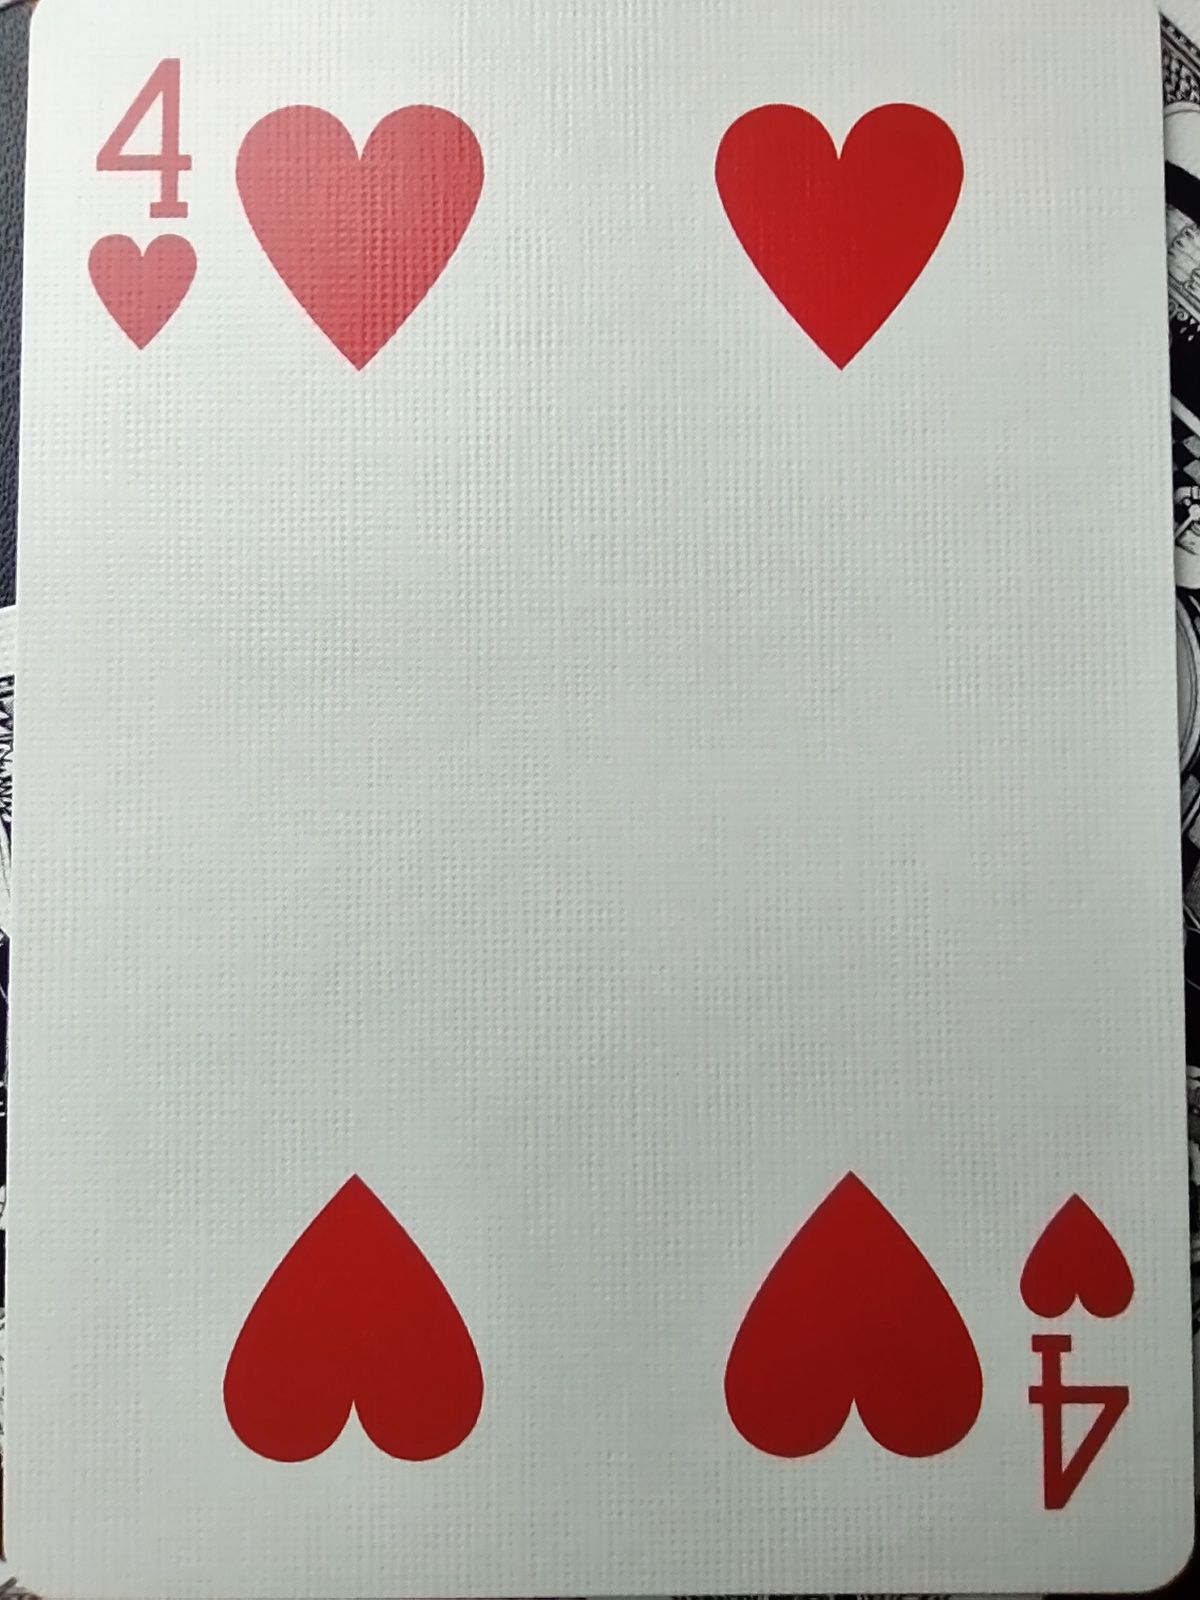 4 of hearts. From the Fantastique deck by Art of Play.